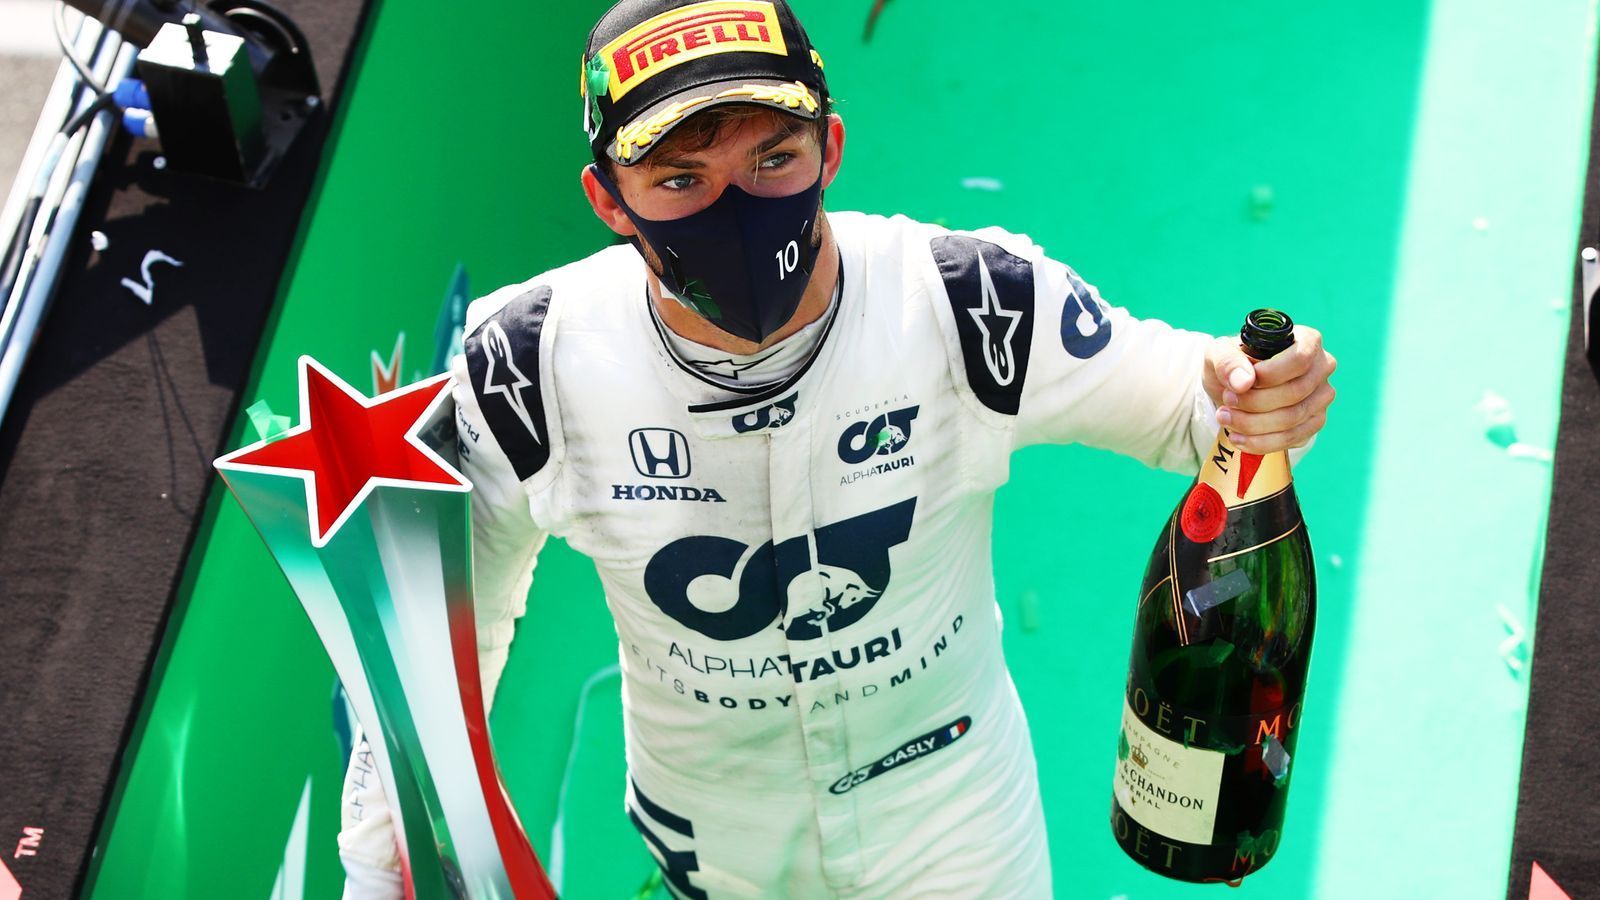 Italian GP: Pierre Gasly wins for AlphaTauri after Lewis Hamilton penalty